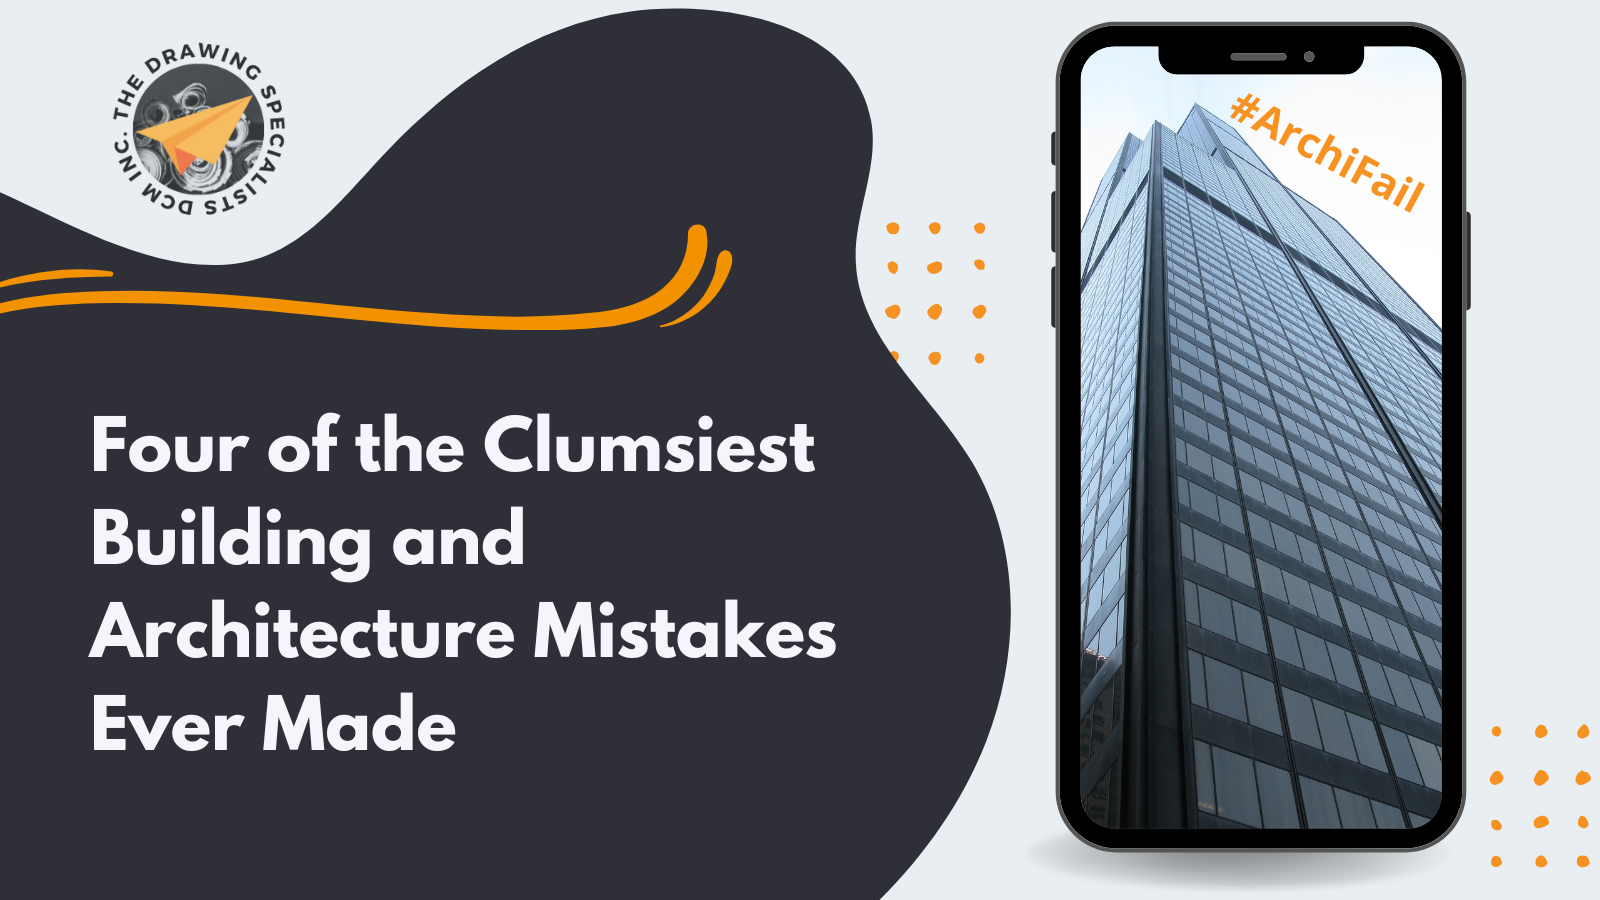 Four of the Clumsiest Building and Architecture Mistakes Ever Made